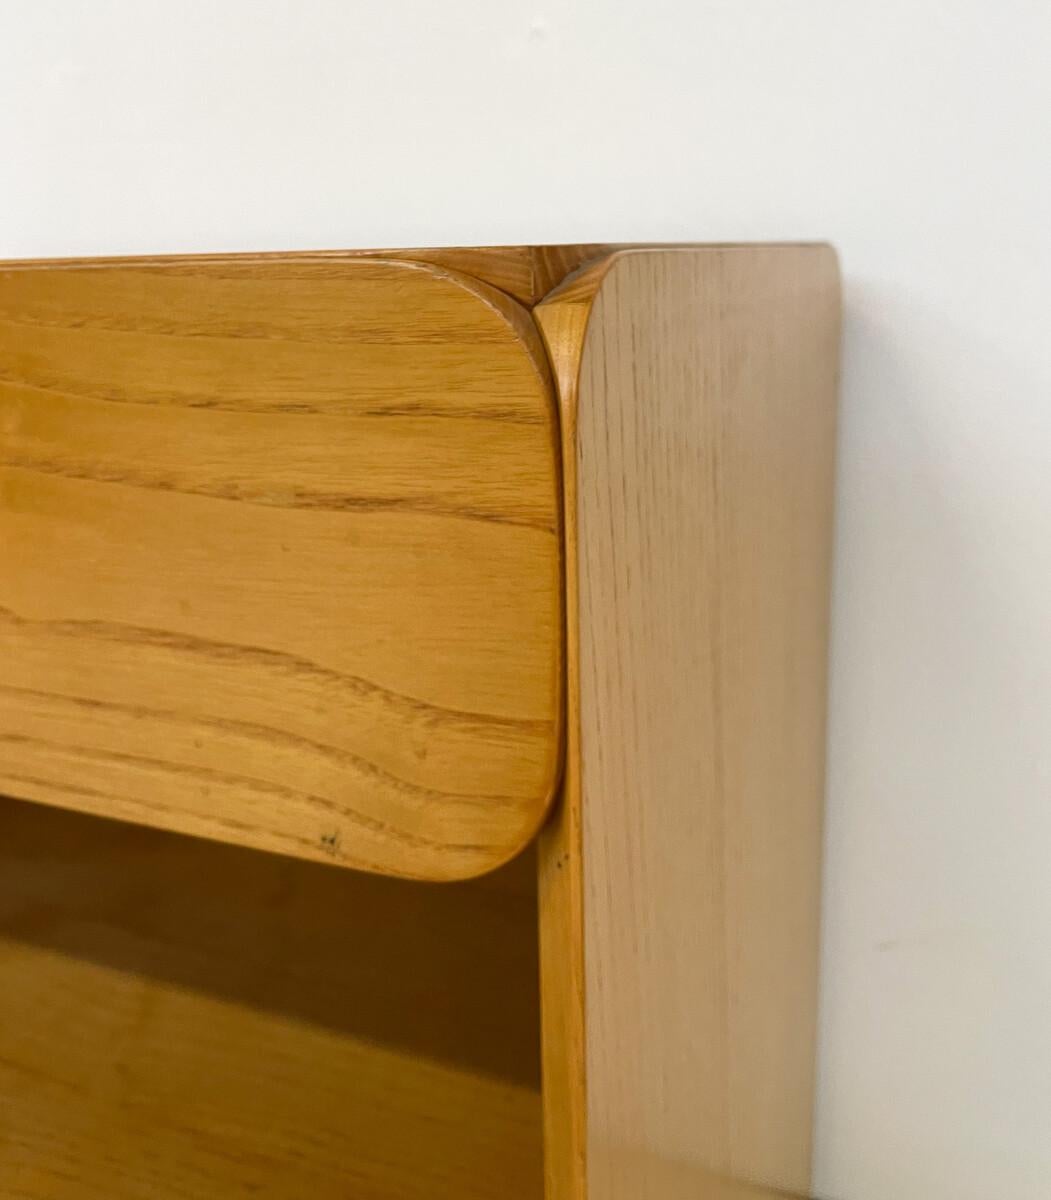 Dutch Midcentury Small Wooden Chest of Drawer by Derk Jan De Vries for Domus, 1960s For Sale